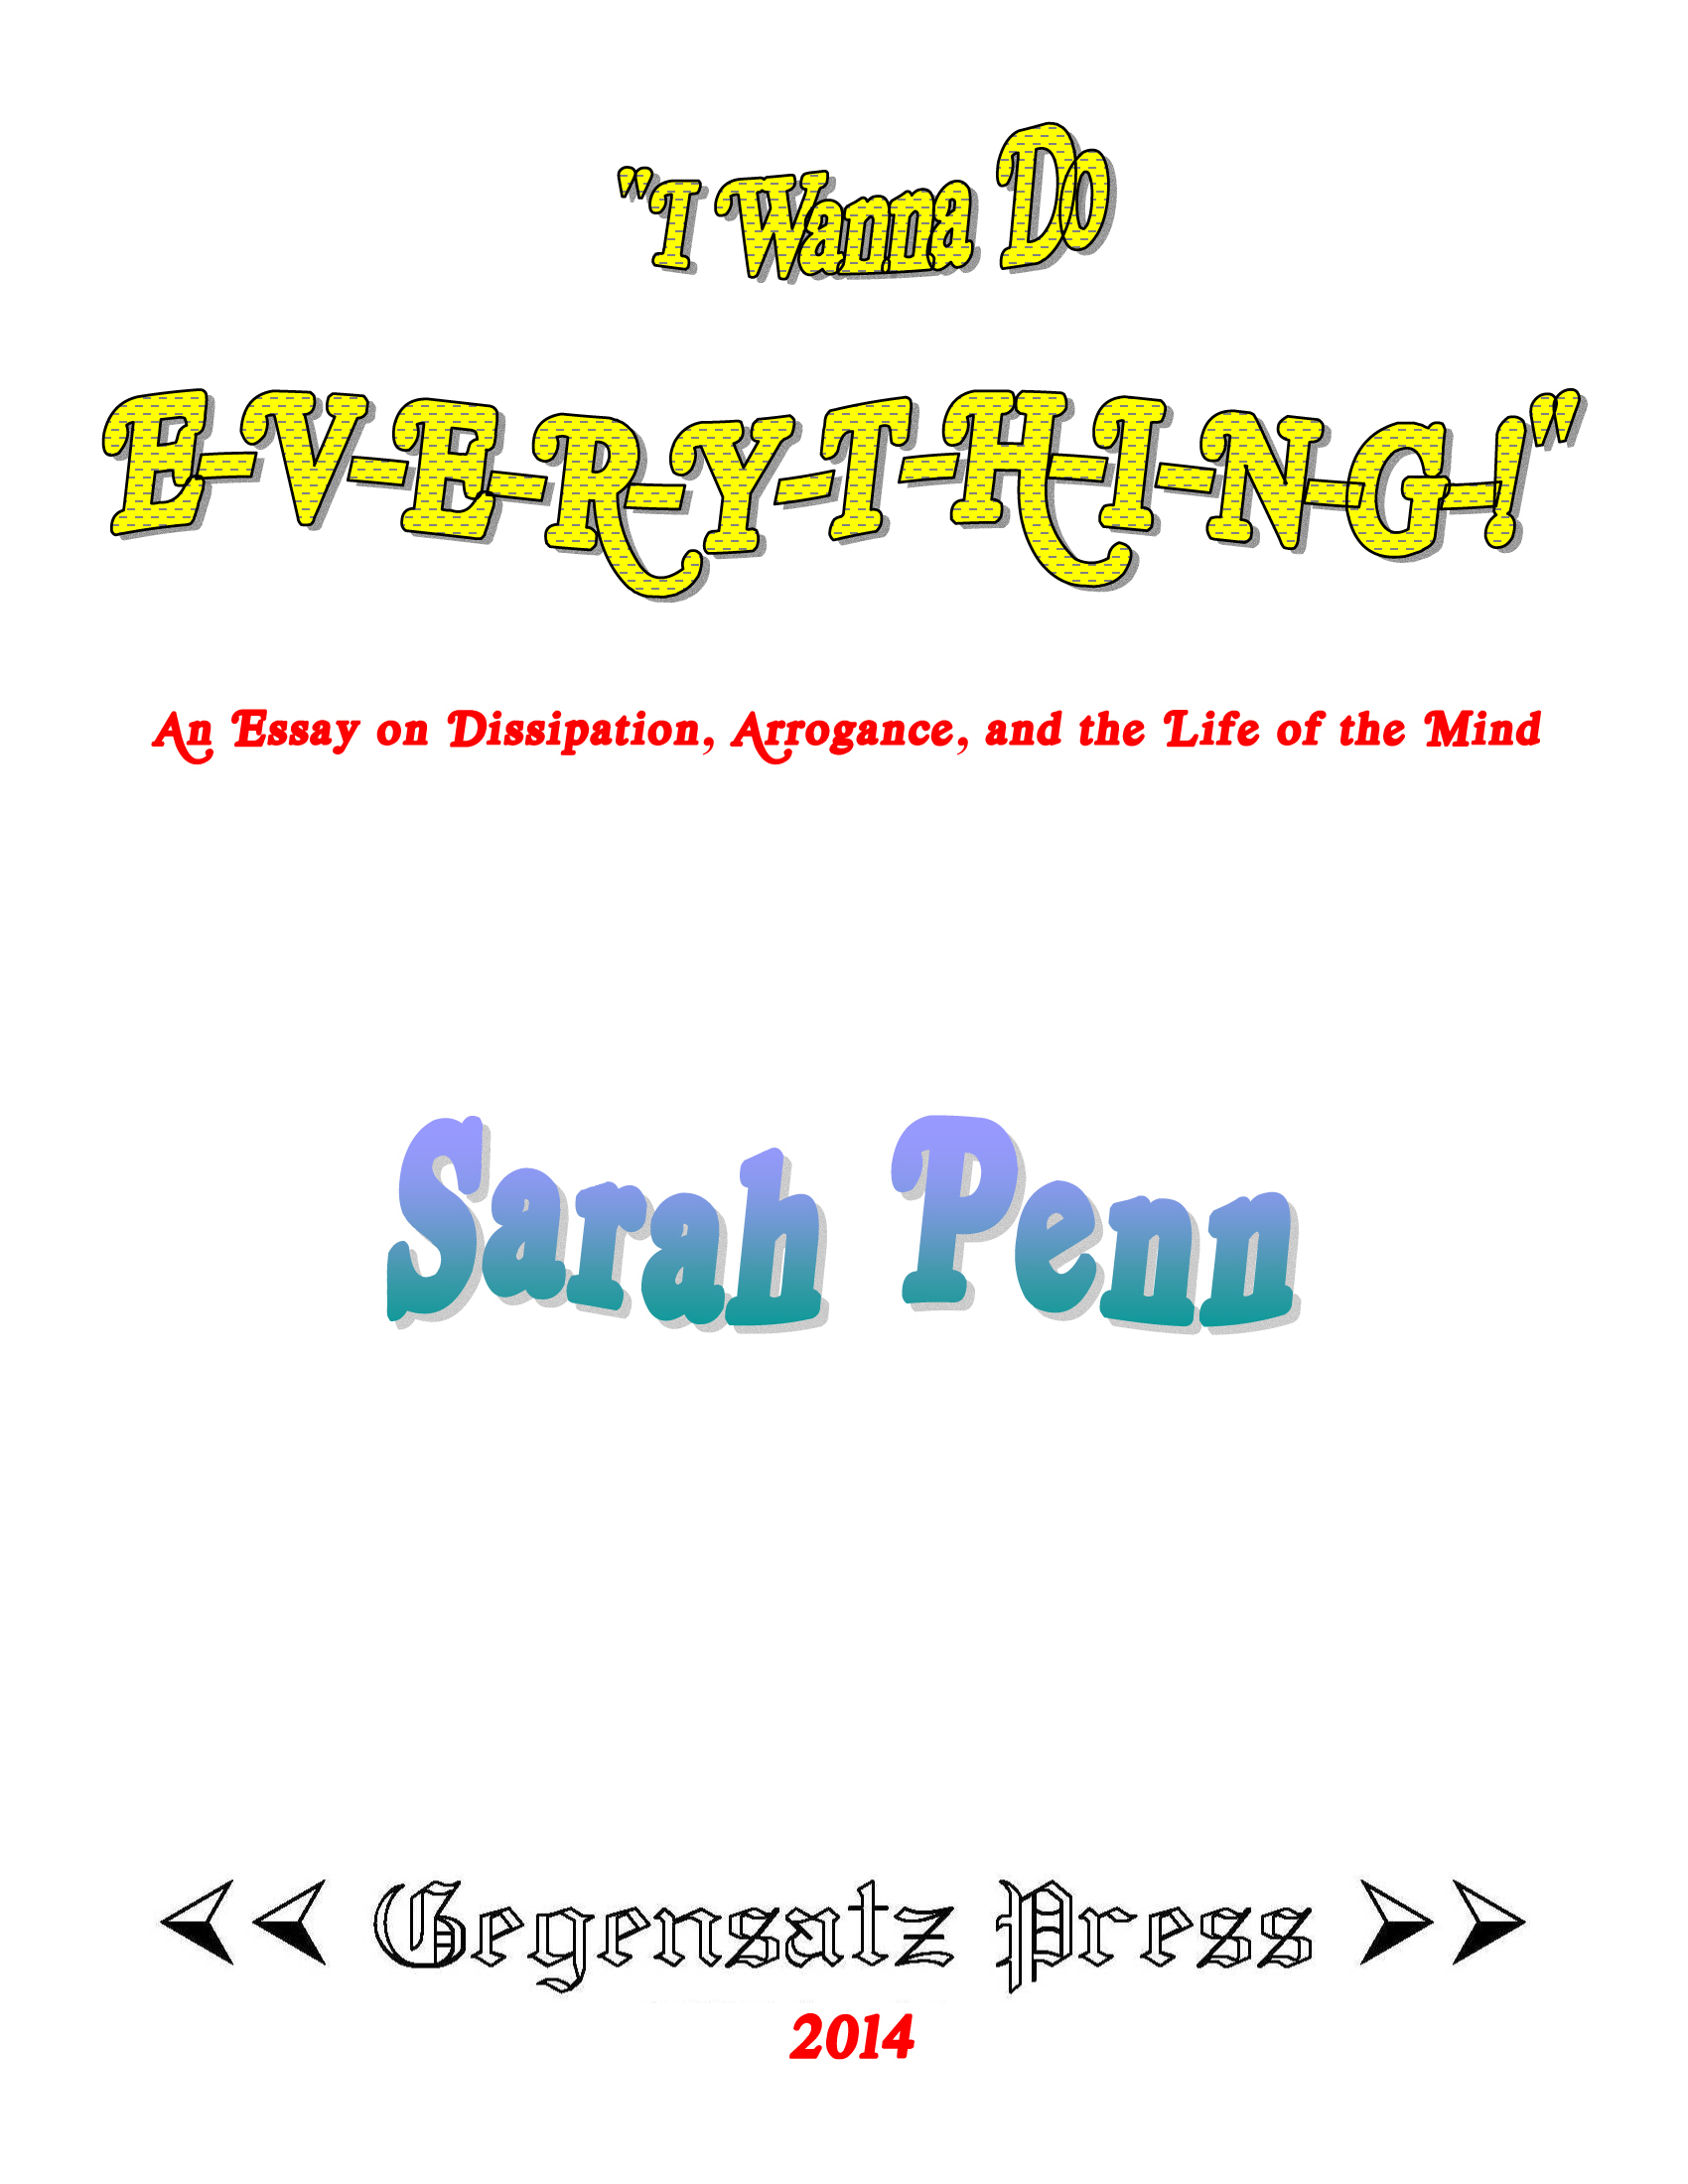 I Wanna Do Everything! An Essay on Dissipation, Arrogance, and the Life of the Mind by Sarah Penn - title page